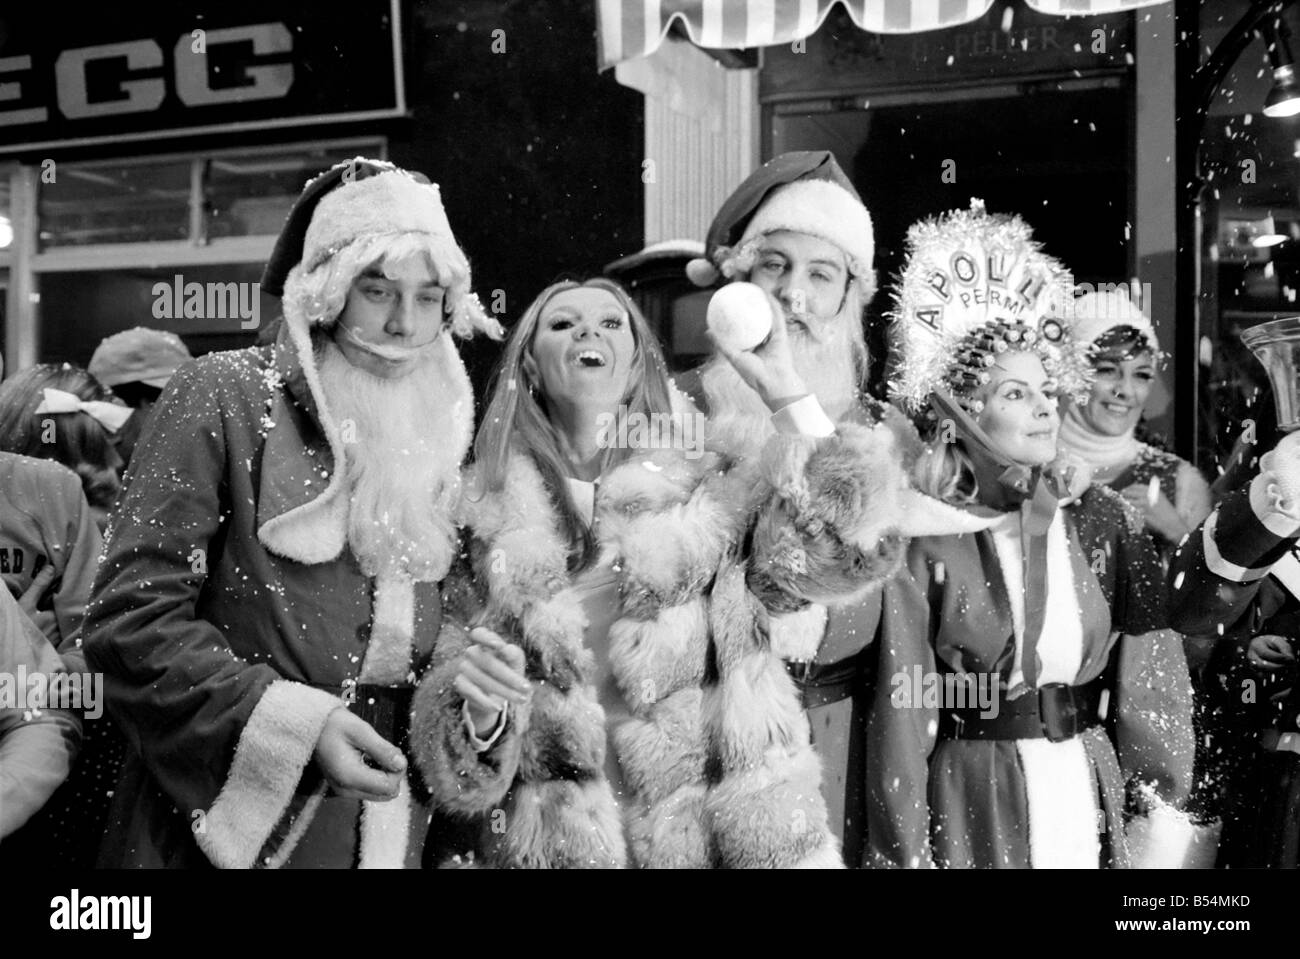 Festive Scenes. In South Molton street, Mayfair , it was snowing but it was only plastic snow that was falling. Singer Clodagh Rogers was present with Father and Mother Christmas, to open the street's Christmas display of lights. Clodagh Rogers with snowballs with Mother and Father Christmas. December 1969 Z11515-005 Stock Photo